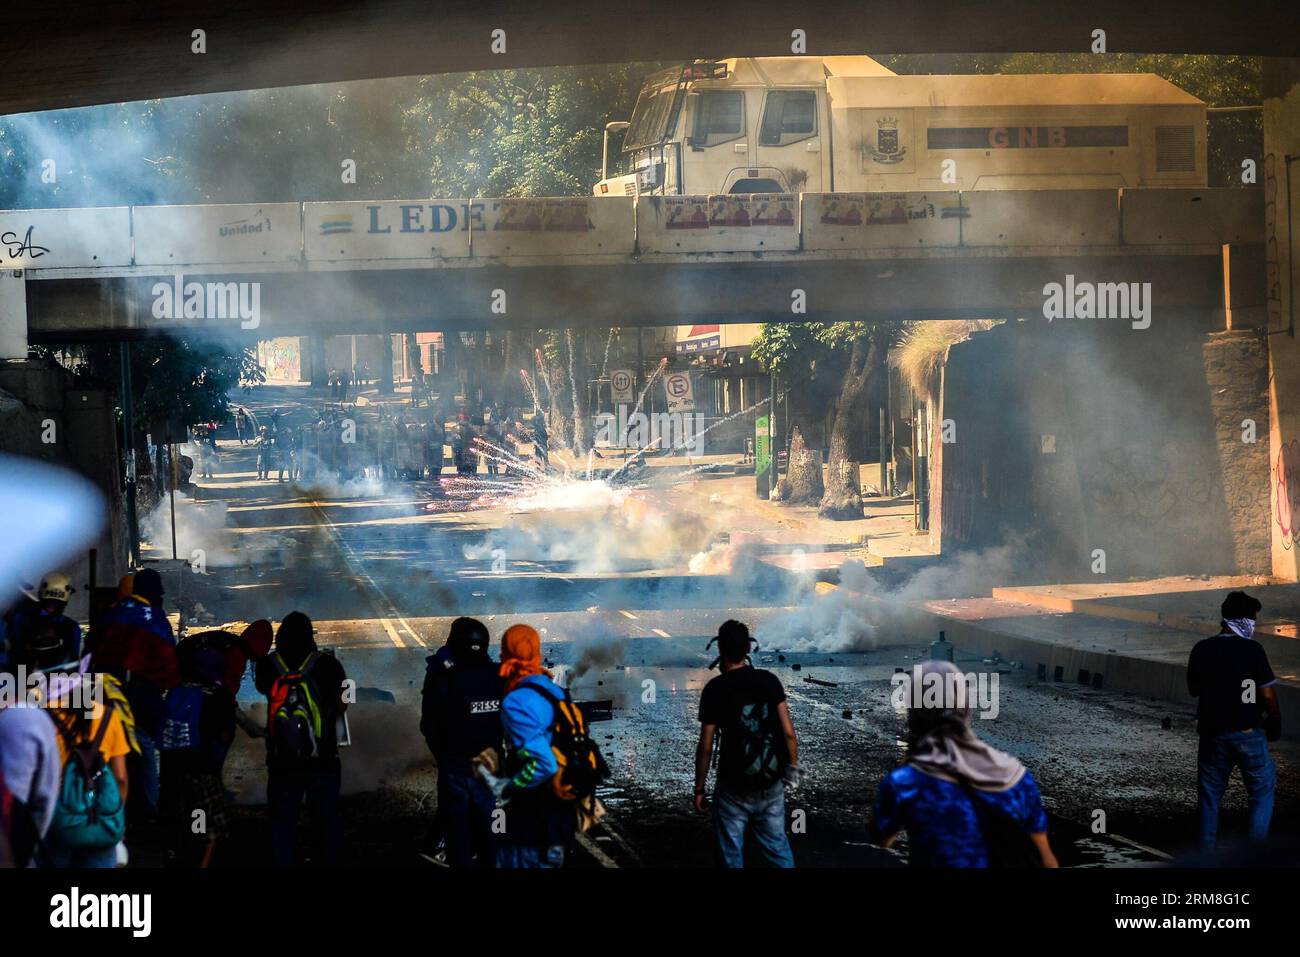 Members of the Bolivarian National Police and the Bolivarian National Guard try to disperse demonstrators during an anti-government student protest in Las Mercedes, Caracas, Venezuela, on April 12, 2014. (Xinhua/Carlos Becerra) (fnc) VENEZUELA-CARACAS-SOCIETY-PROTEST PUBLICATIONxNOTxINxCHN   Members of The Bolivarian National Police and The Bolivarian National Guard Try to  demonstrator during to Anti Government Student Protest in Las Mercedes Caracas Venezuela ON April 12 2014 XINHUA Carlos Becerra FNC Venezuela Caracas Society Protest PUBLICATIONxNOTxINxCHN Stock Photo